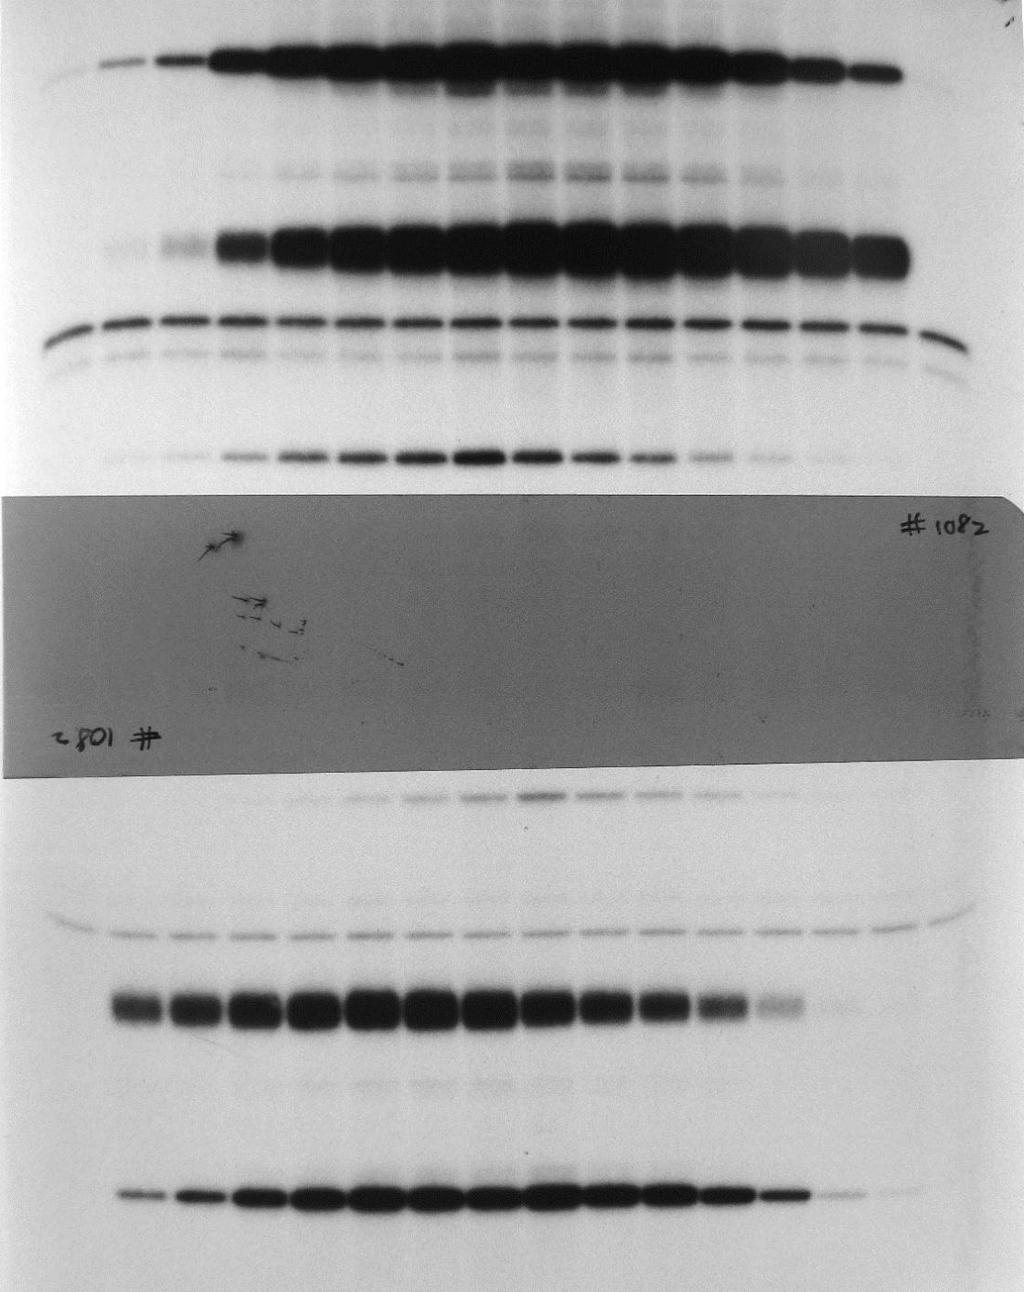 5µg of each of the polymerase subunit-expressing plasmids and the plasmid expressing the 221 nucleotide long RNA template were transfected together with the amount of